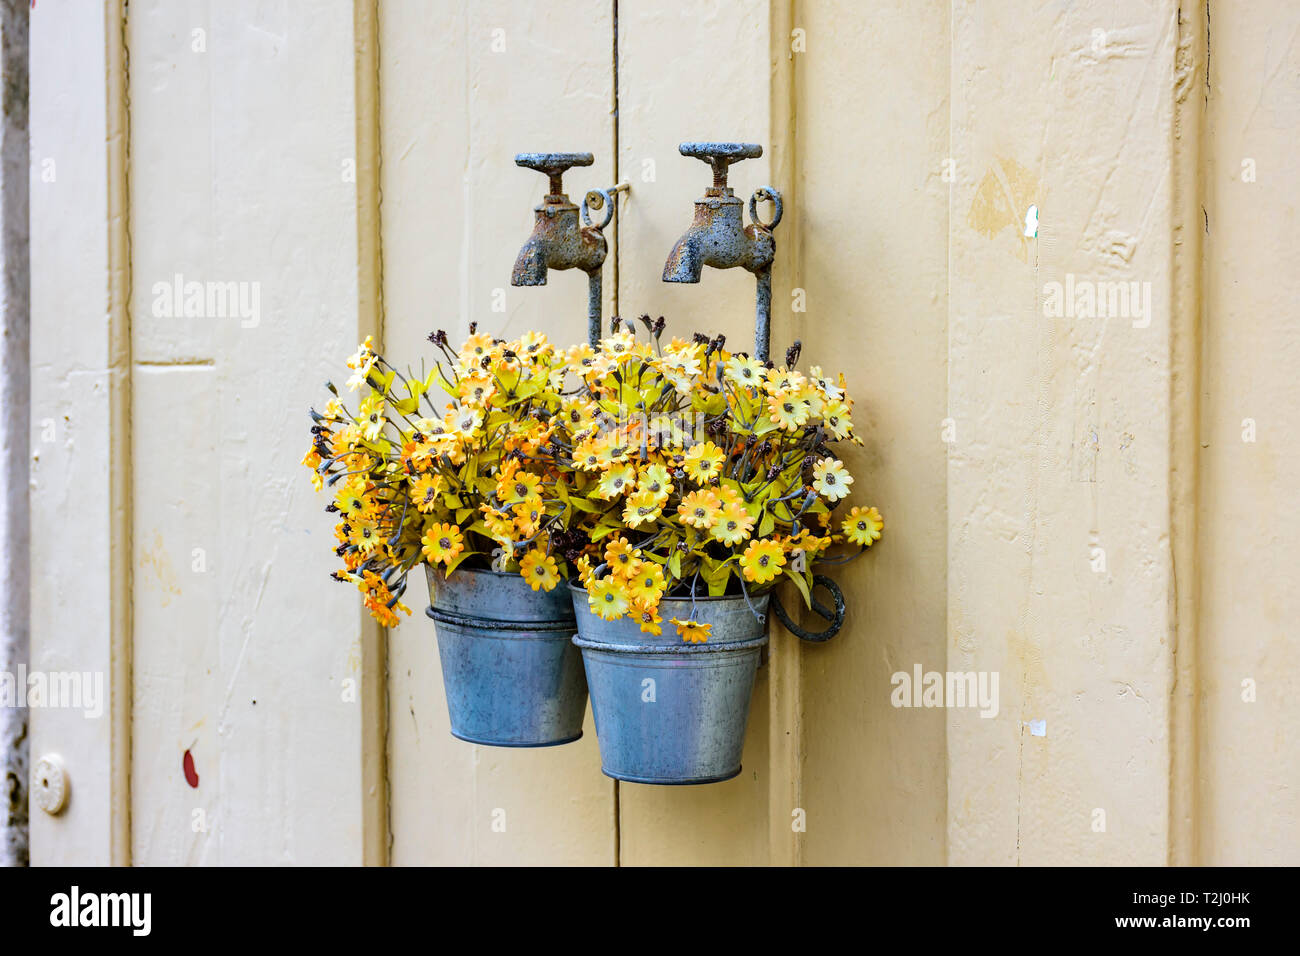 Bucket with yellow flowers hanging on an old metal faucet decorating a wooden door at the entrance of a house Stock Photo